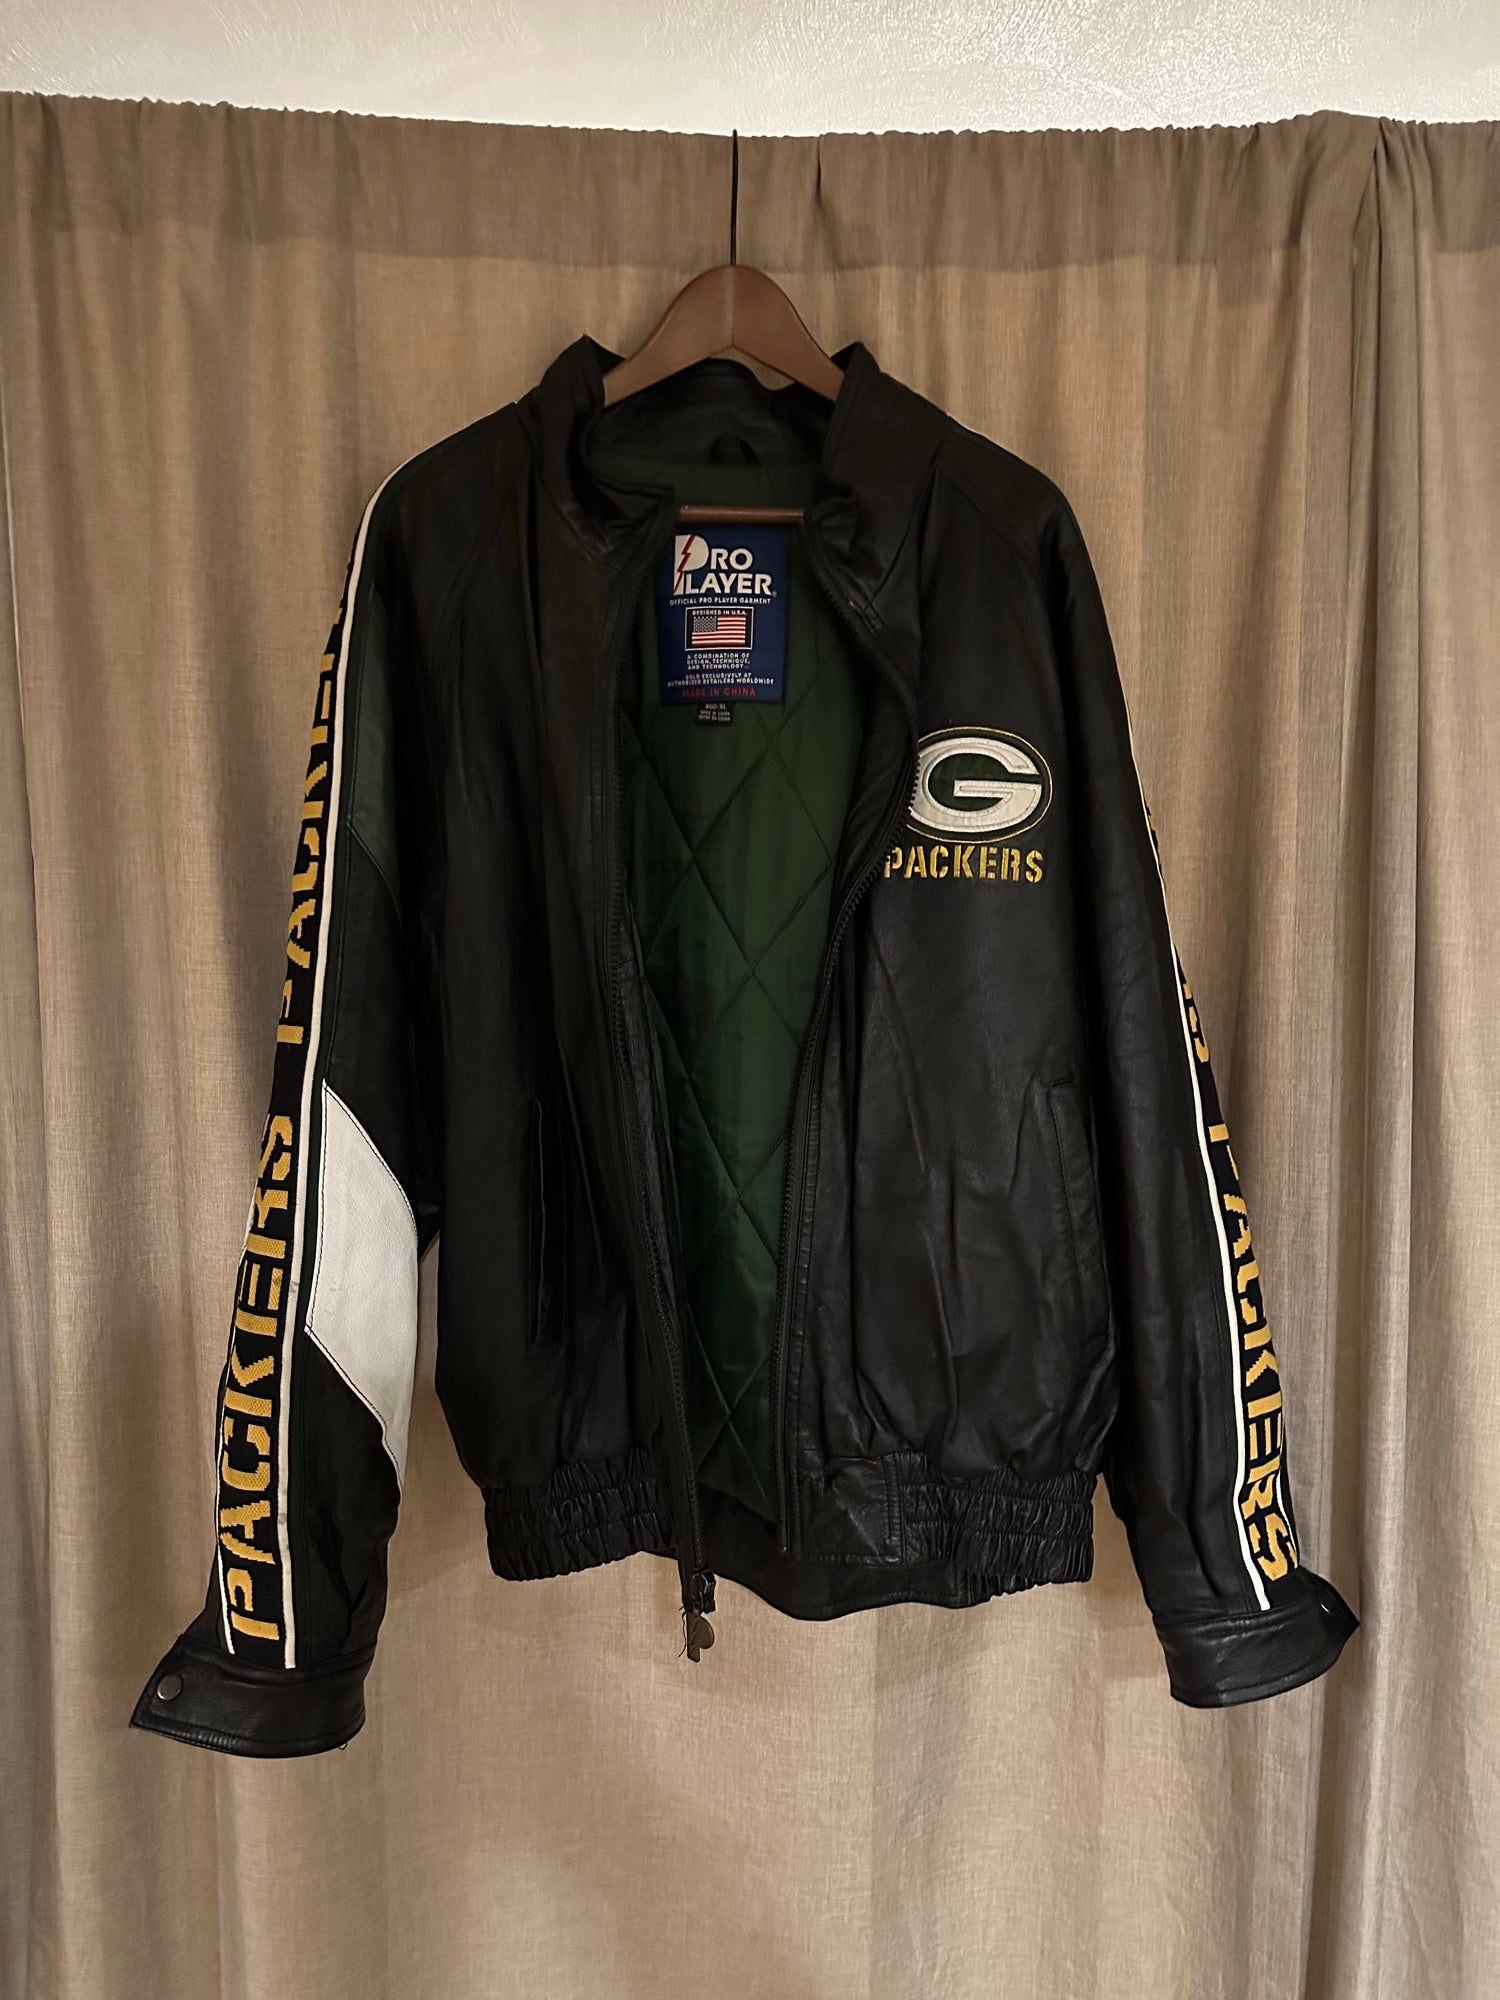 Greenbay Packers Pro player Vintage 90s Leather Jacket | SidelineSwap